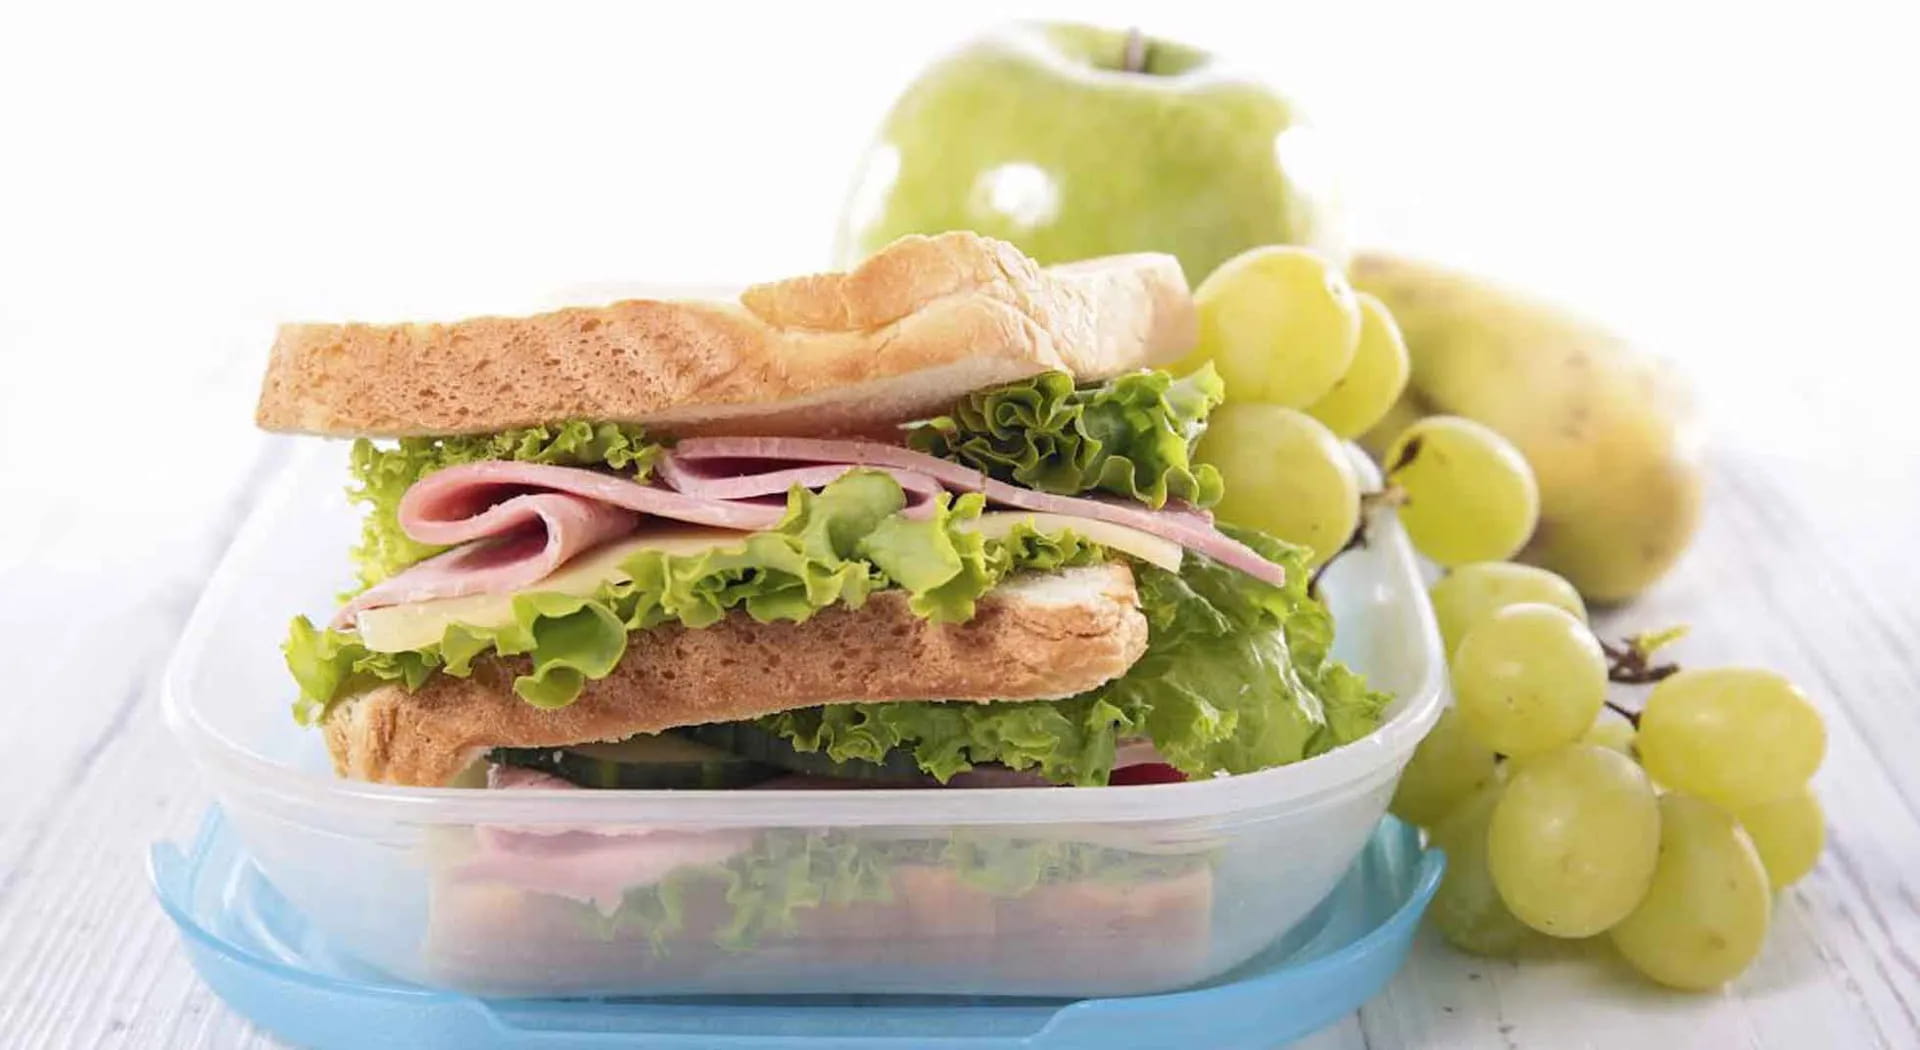 How to pack sandwiches to take them wherever you go